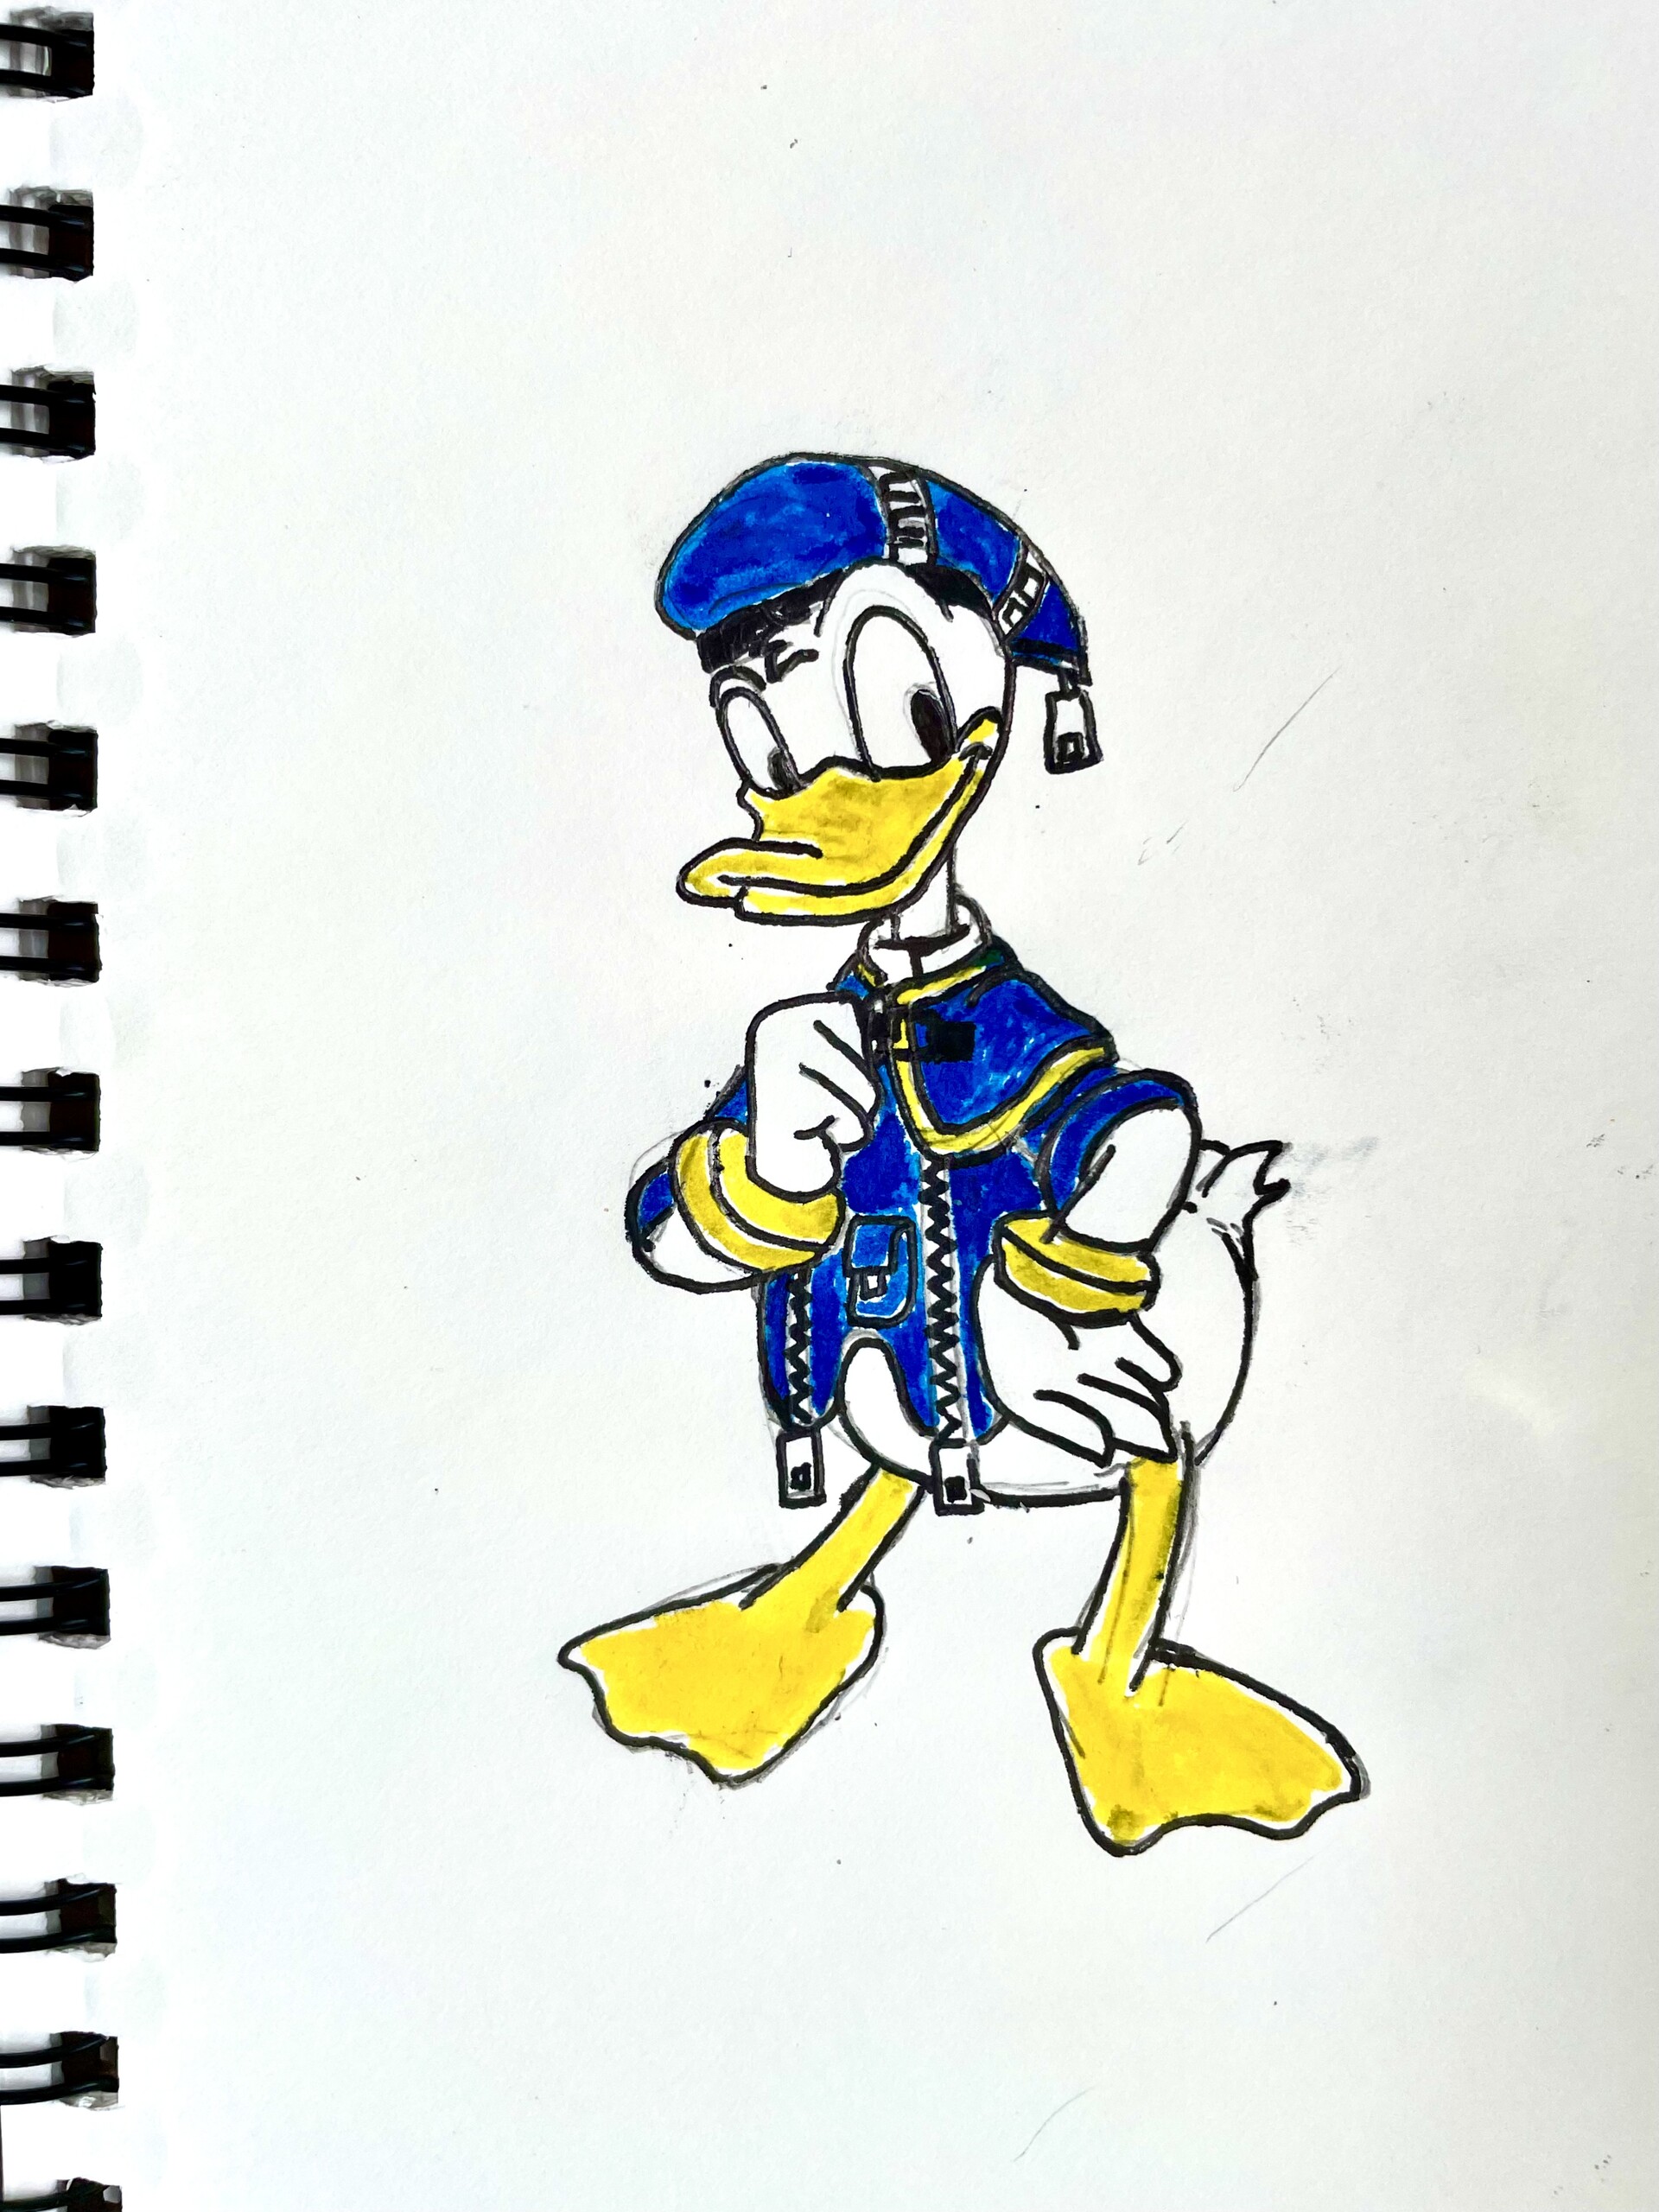 How to draw Donald Duck - My How To Draw